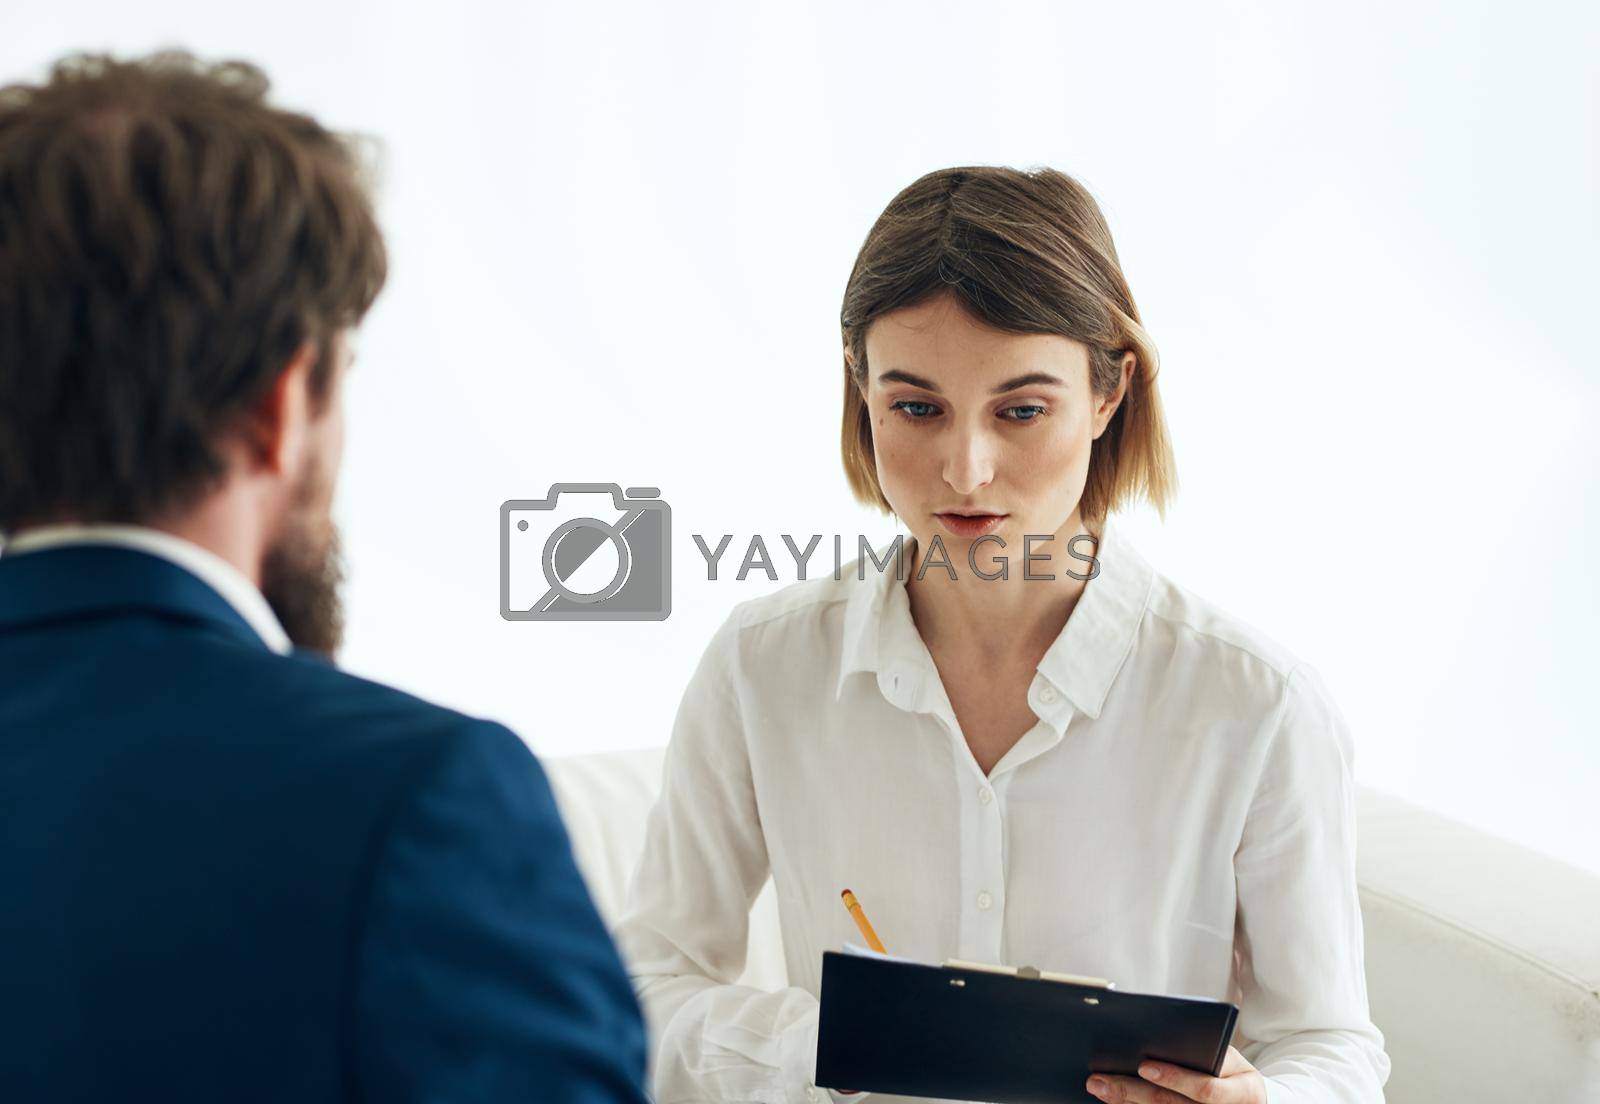 woman and man suit documents communication work . High quality photo